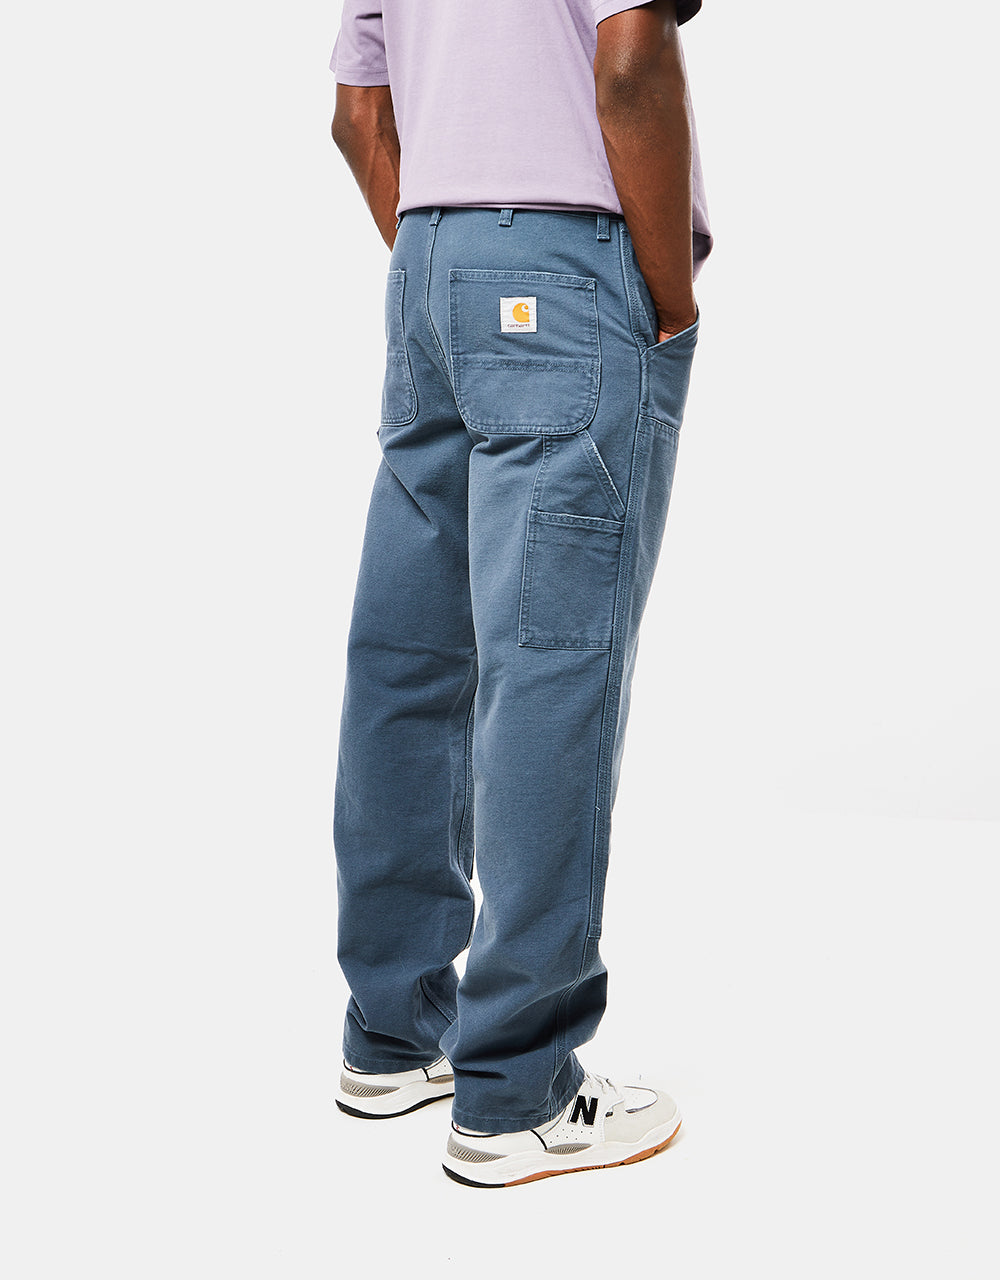 Carhartt WIP Double Knee Pant - Ore (Aged Canvas)